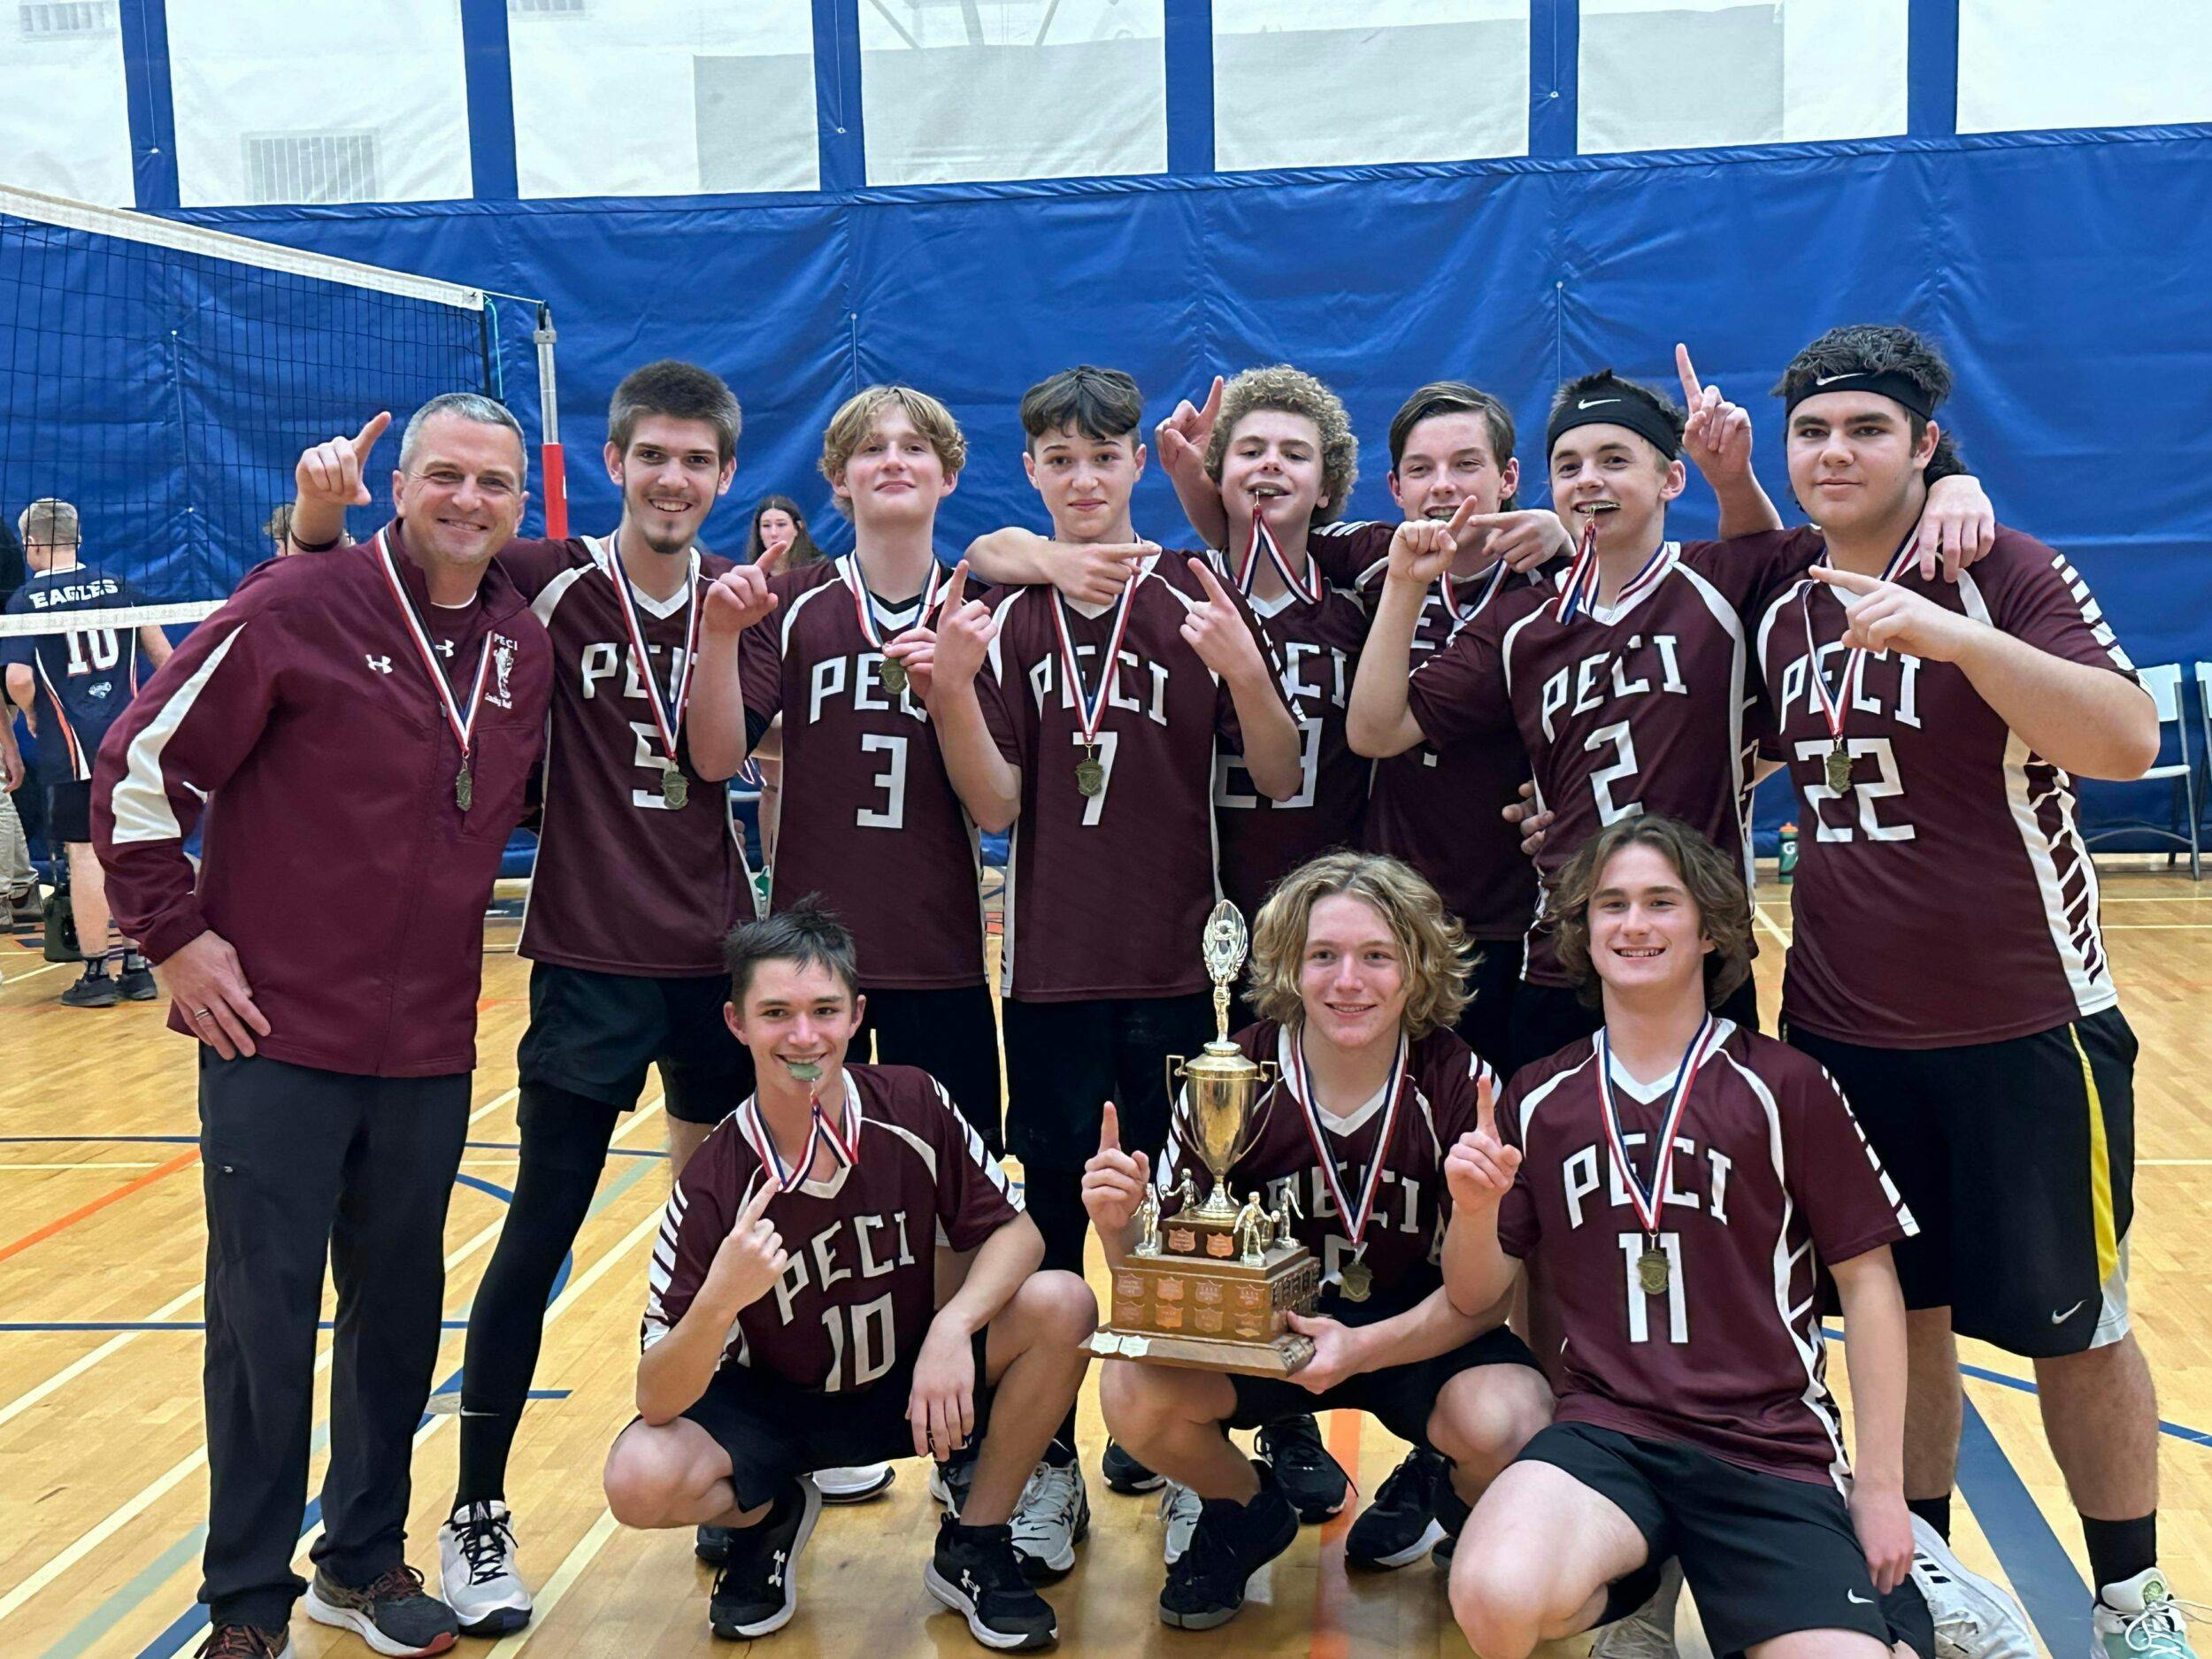 <p>The 2023 Bay of Quinte Jr. Boys Volleyball champions from PECI. (From Left) Coach Andrew Holmes, Emerson Blakely, Malcolm Gregor, Grady Holmes, Avery Longwell, Josh Spencer, Will Bolton, Kieran Craig, (Bottom) Ethan Thompson, Cameron Billing and Jake Banfield. Missing was Kaden Koutroulides (Submitted Photo)</p>
